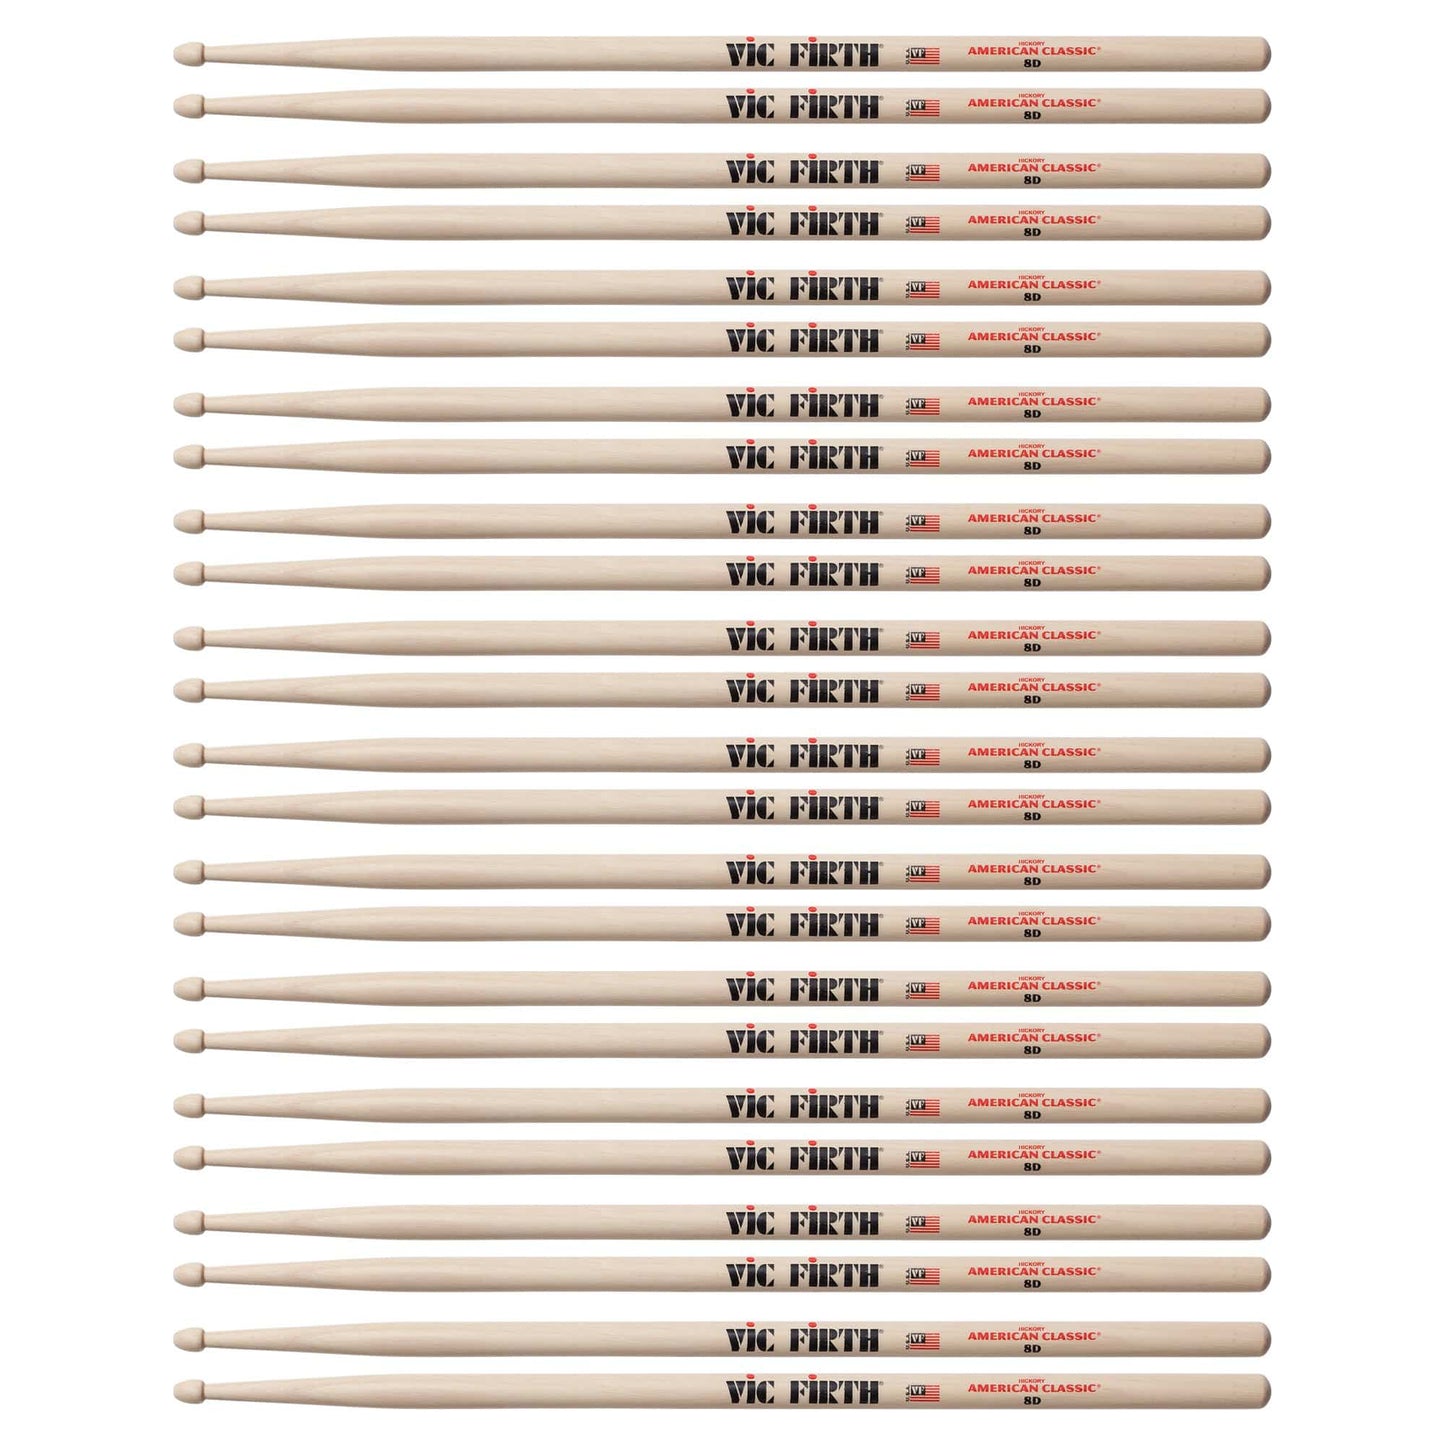 Vic Firth American Classic 8D Wood Tip Drum Sticks (12 Pair Bundle) Drums and Percussion / Parts and Accessories / Drum Sticks and Mallets